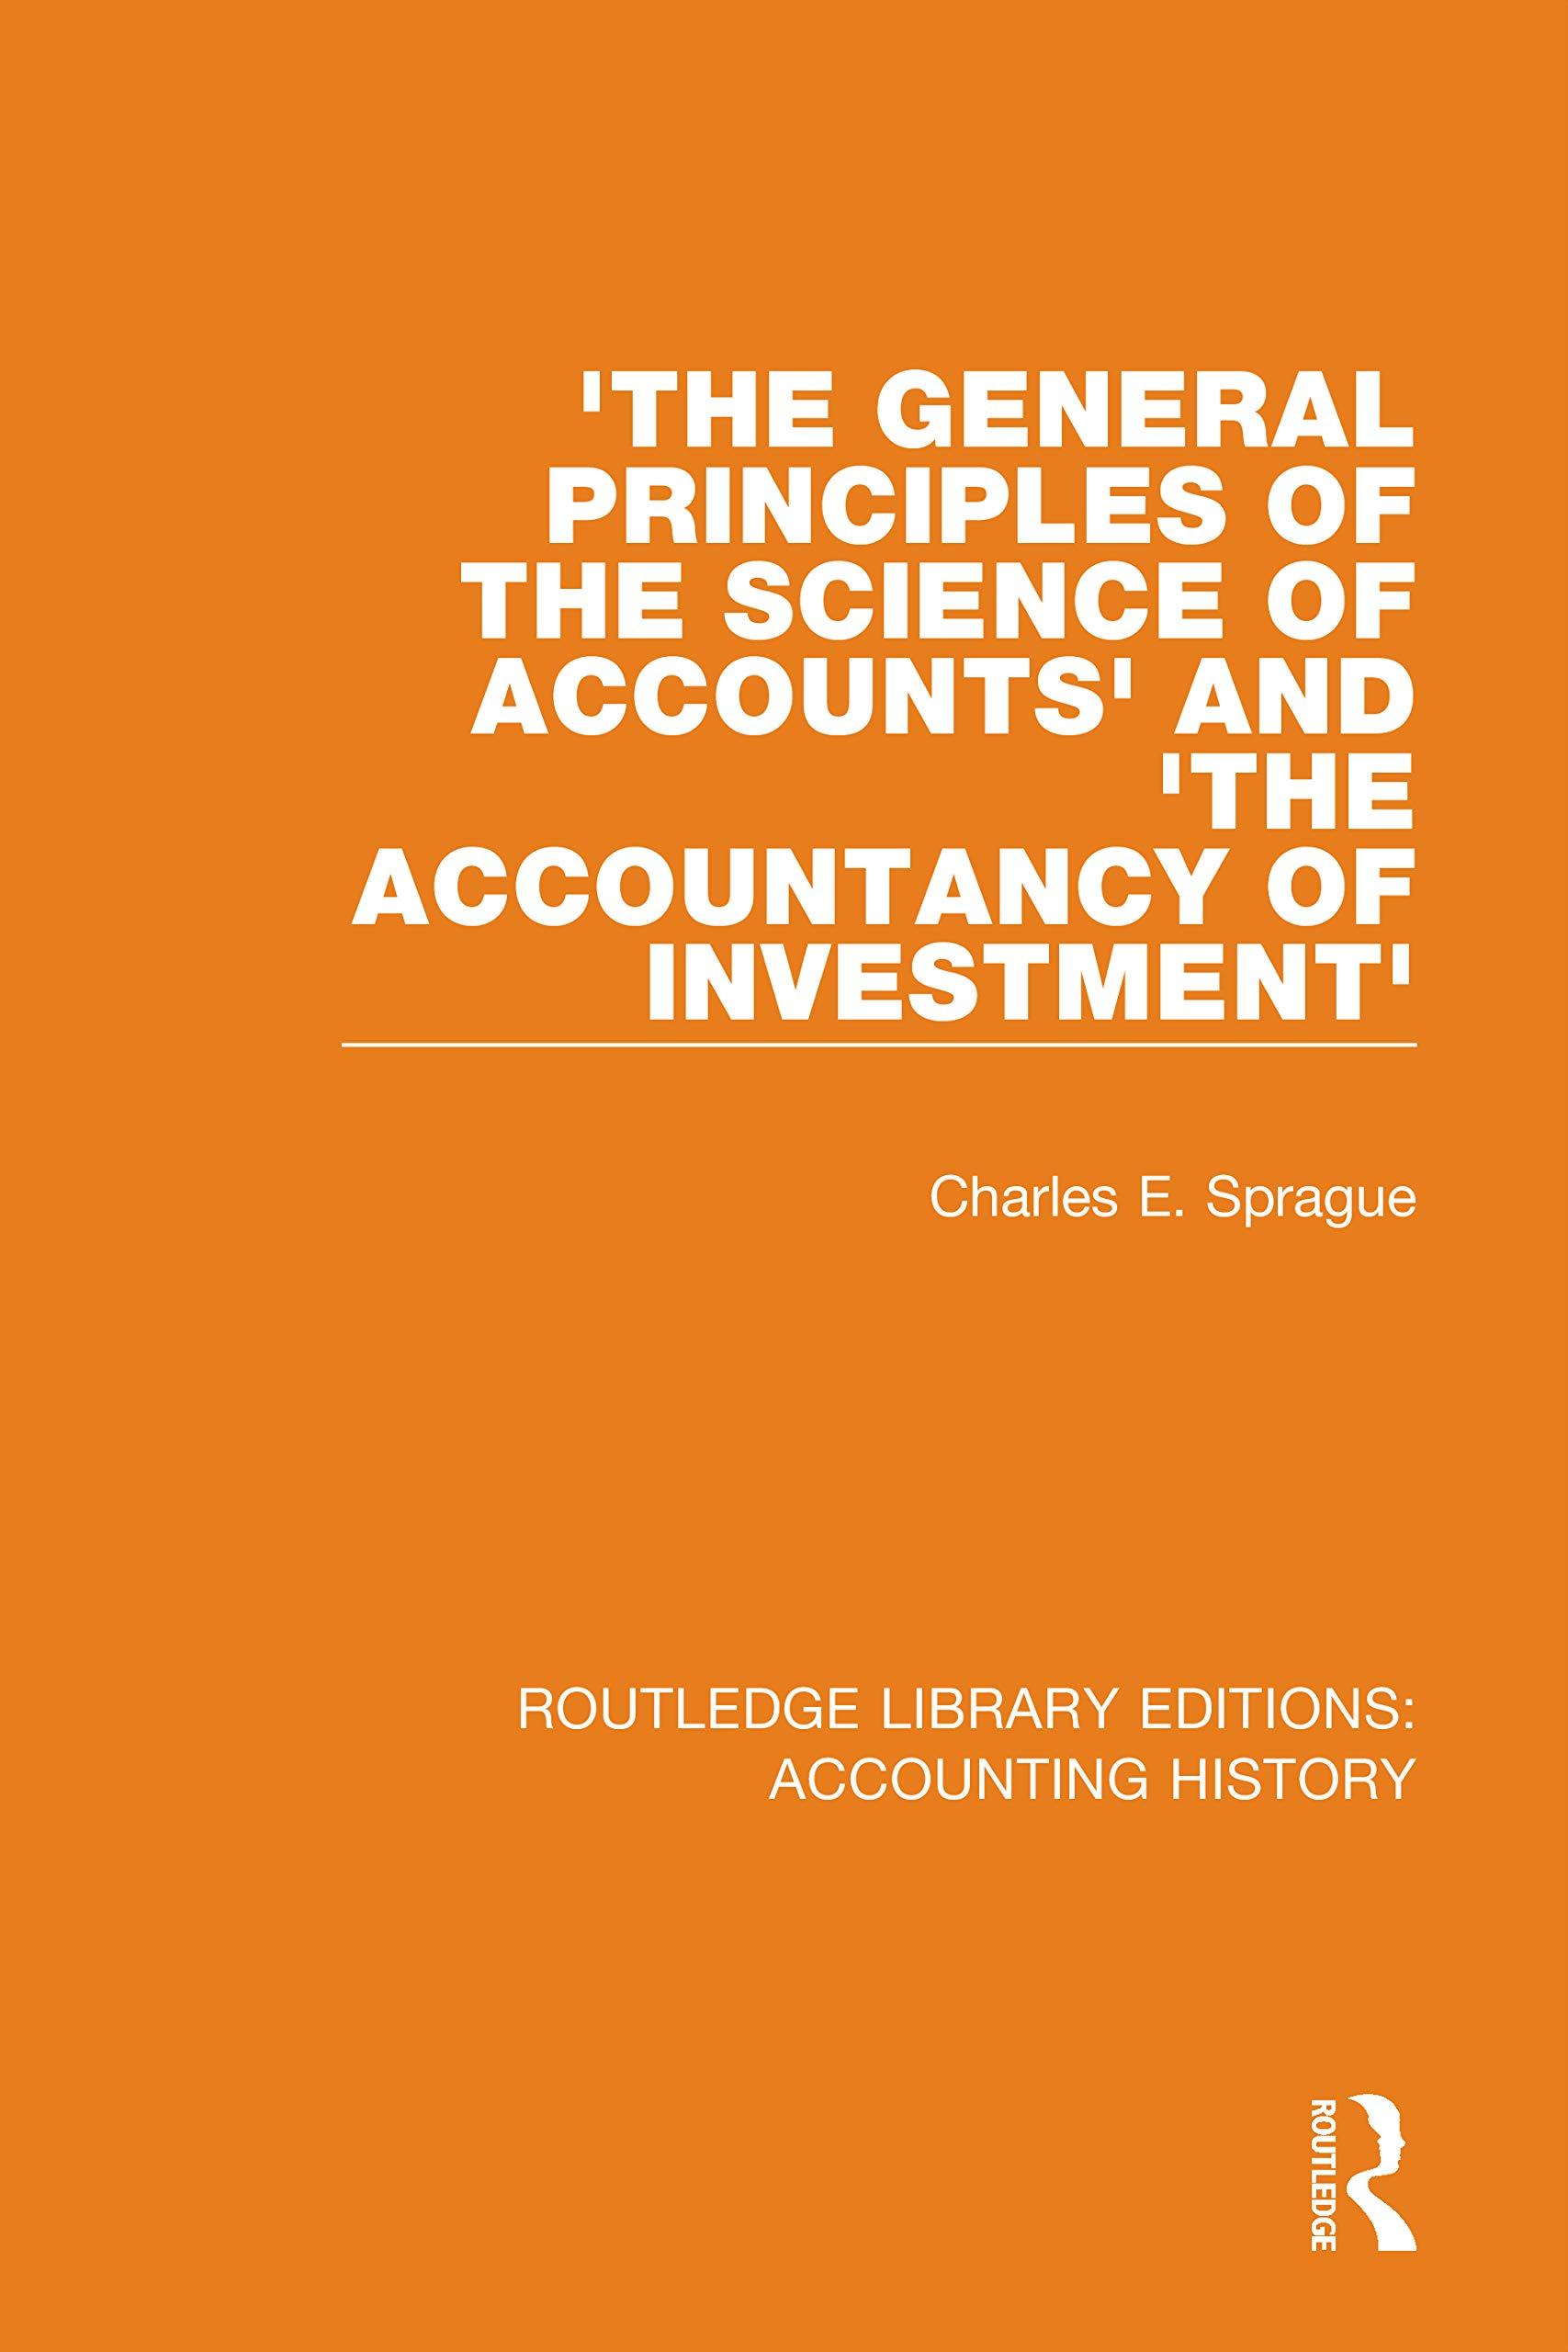 The General Principles Of The Science Of Accounts And The Accountancy Of Investment